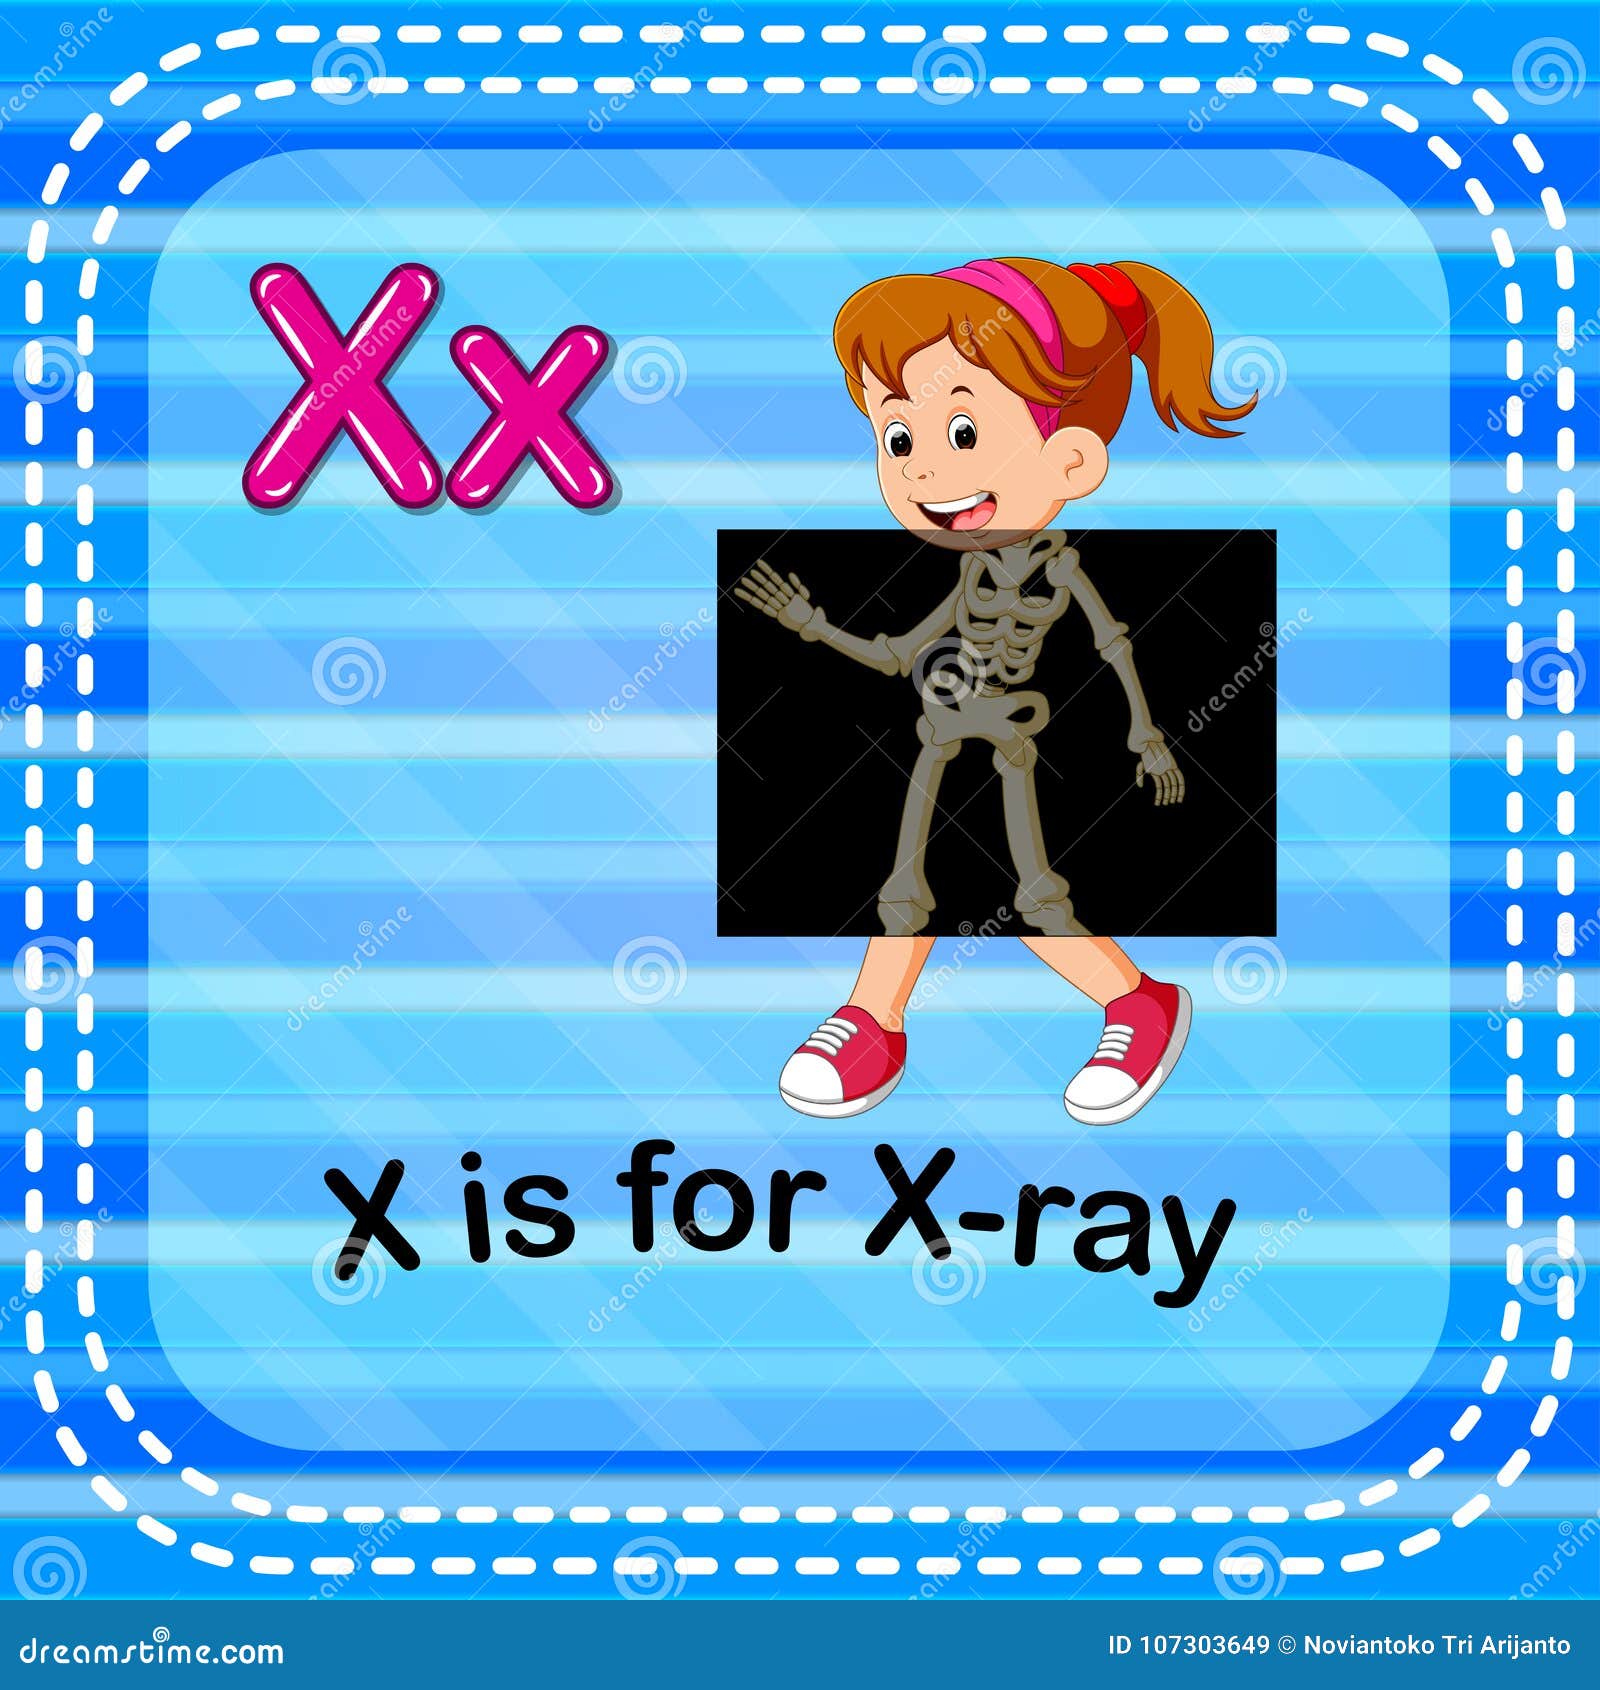 flashcard letter x is for x-ray